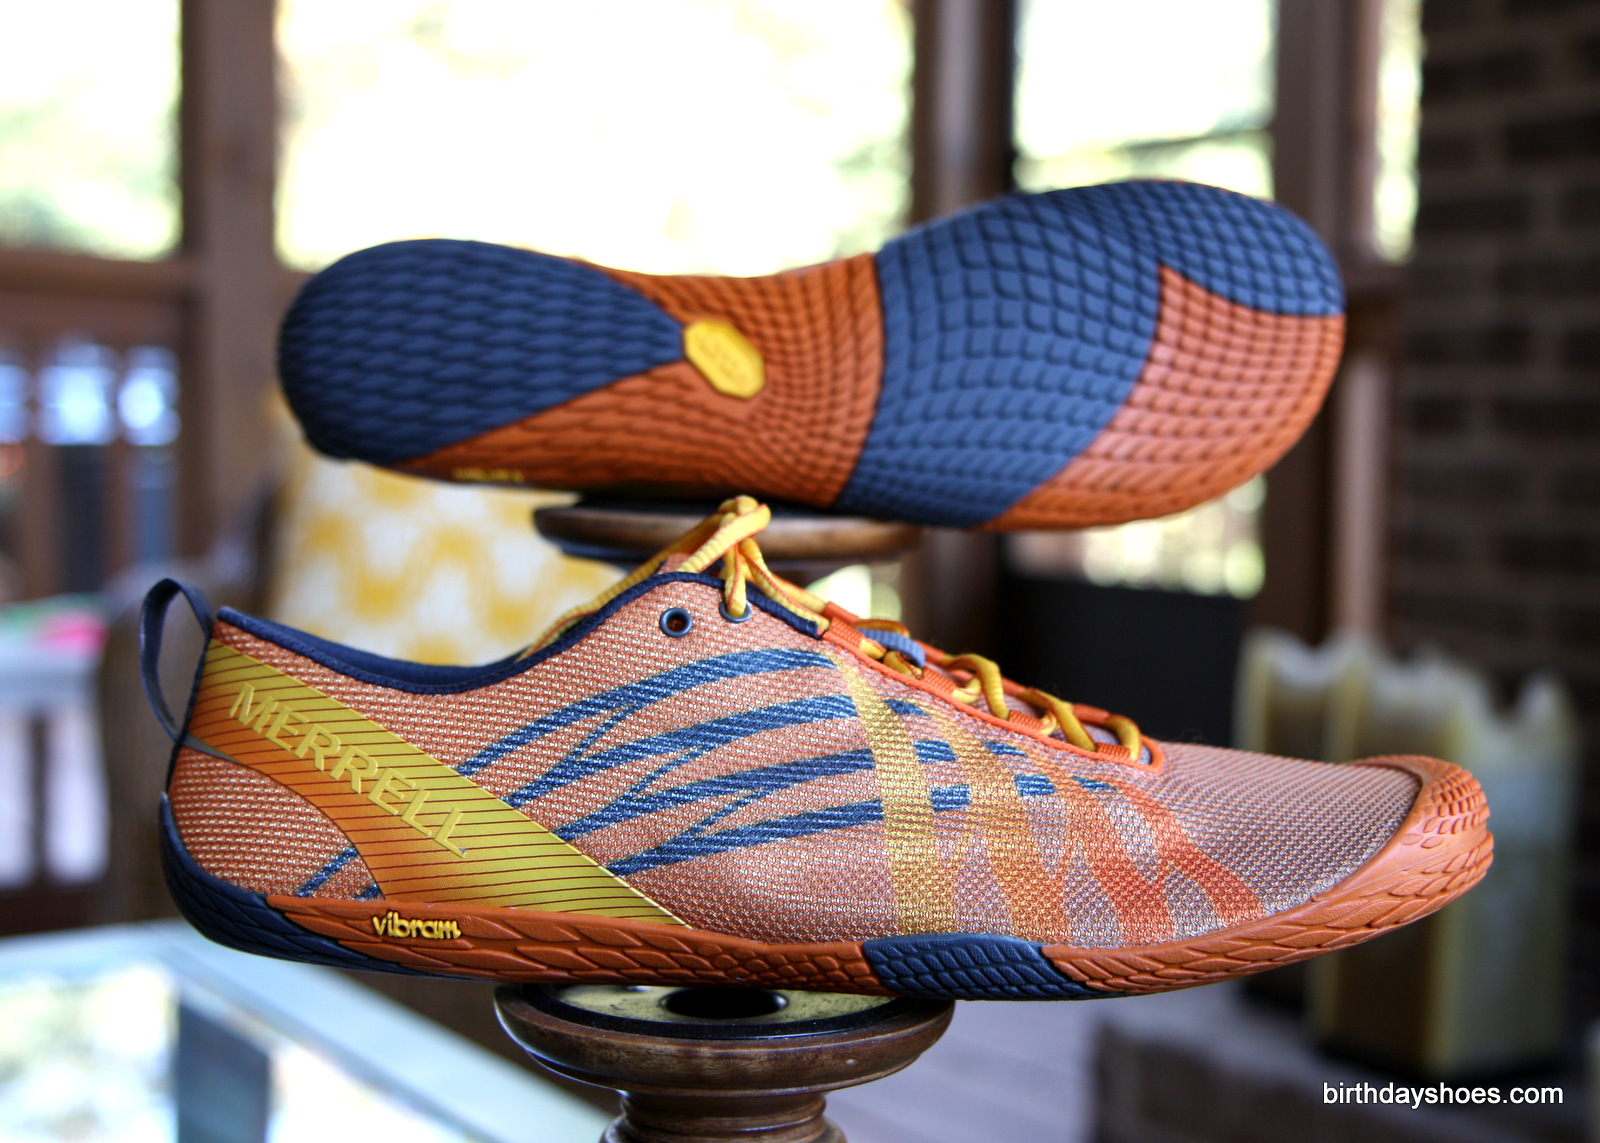 Vapor Glove Merrell Barefoot Initial Review - Shoes - Shoes, Barefoot or Minimalist Shoes, and Vibram Reviews, News, Forums